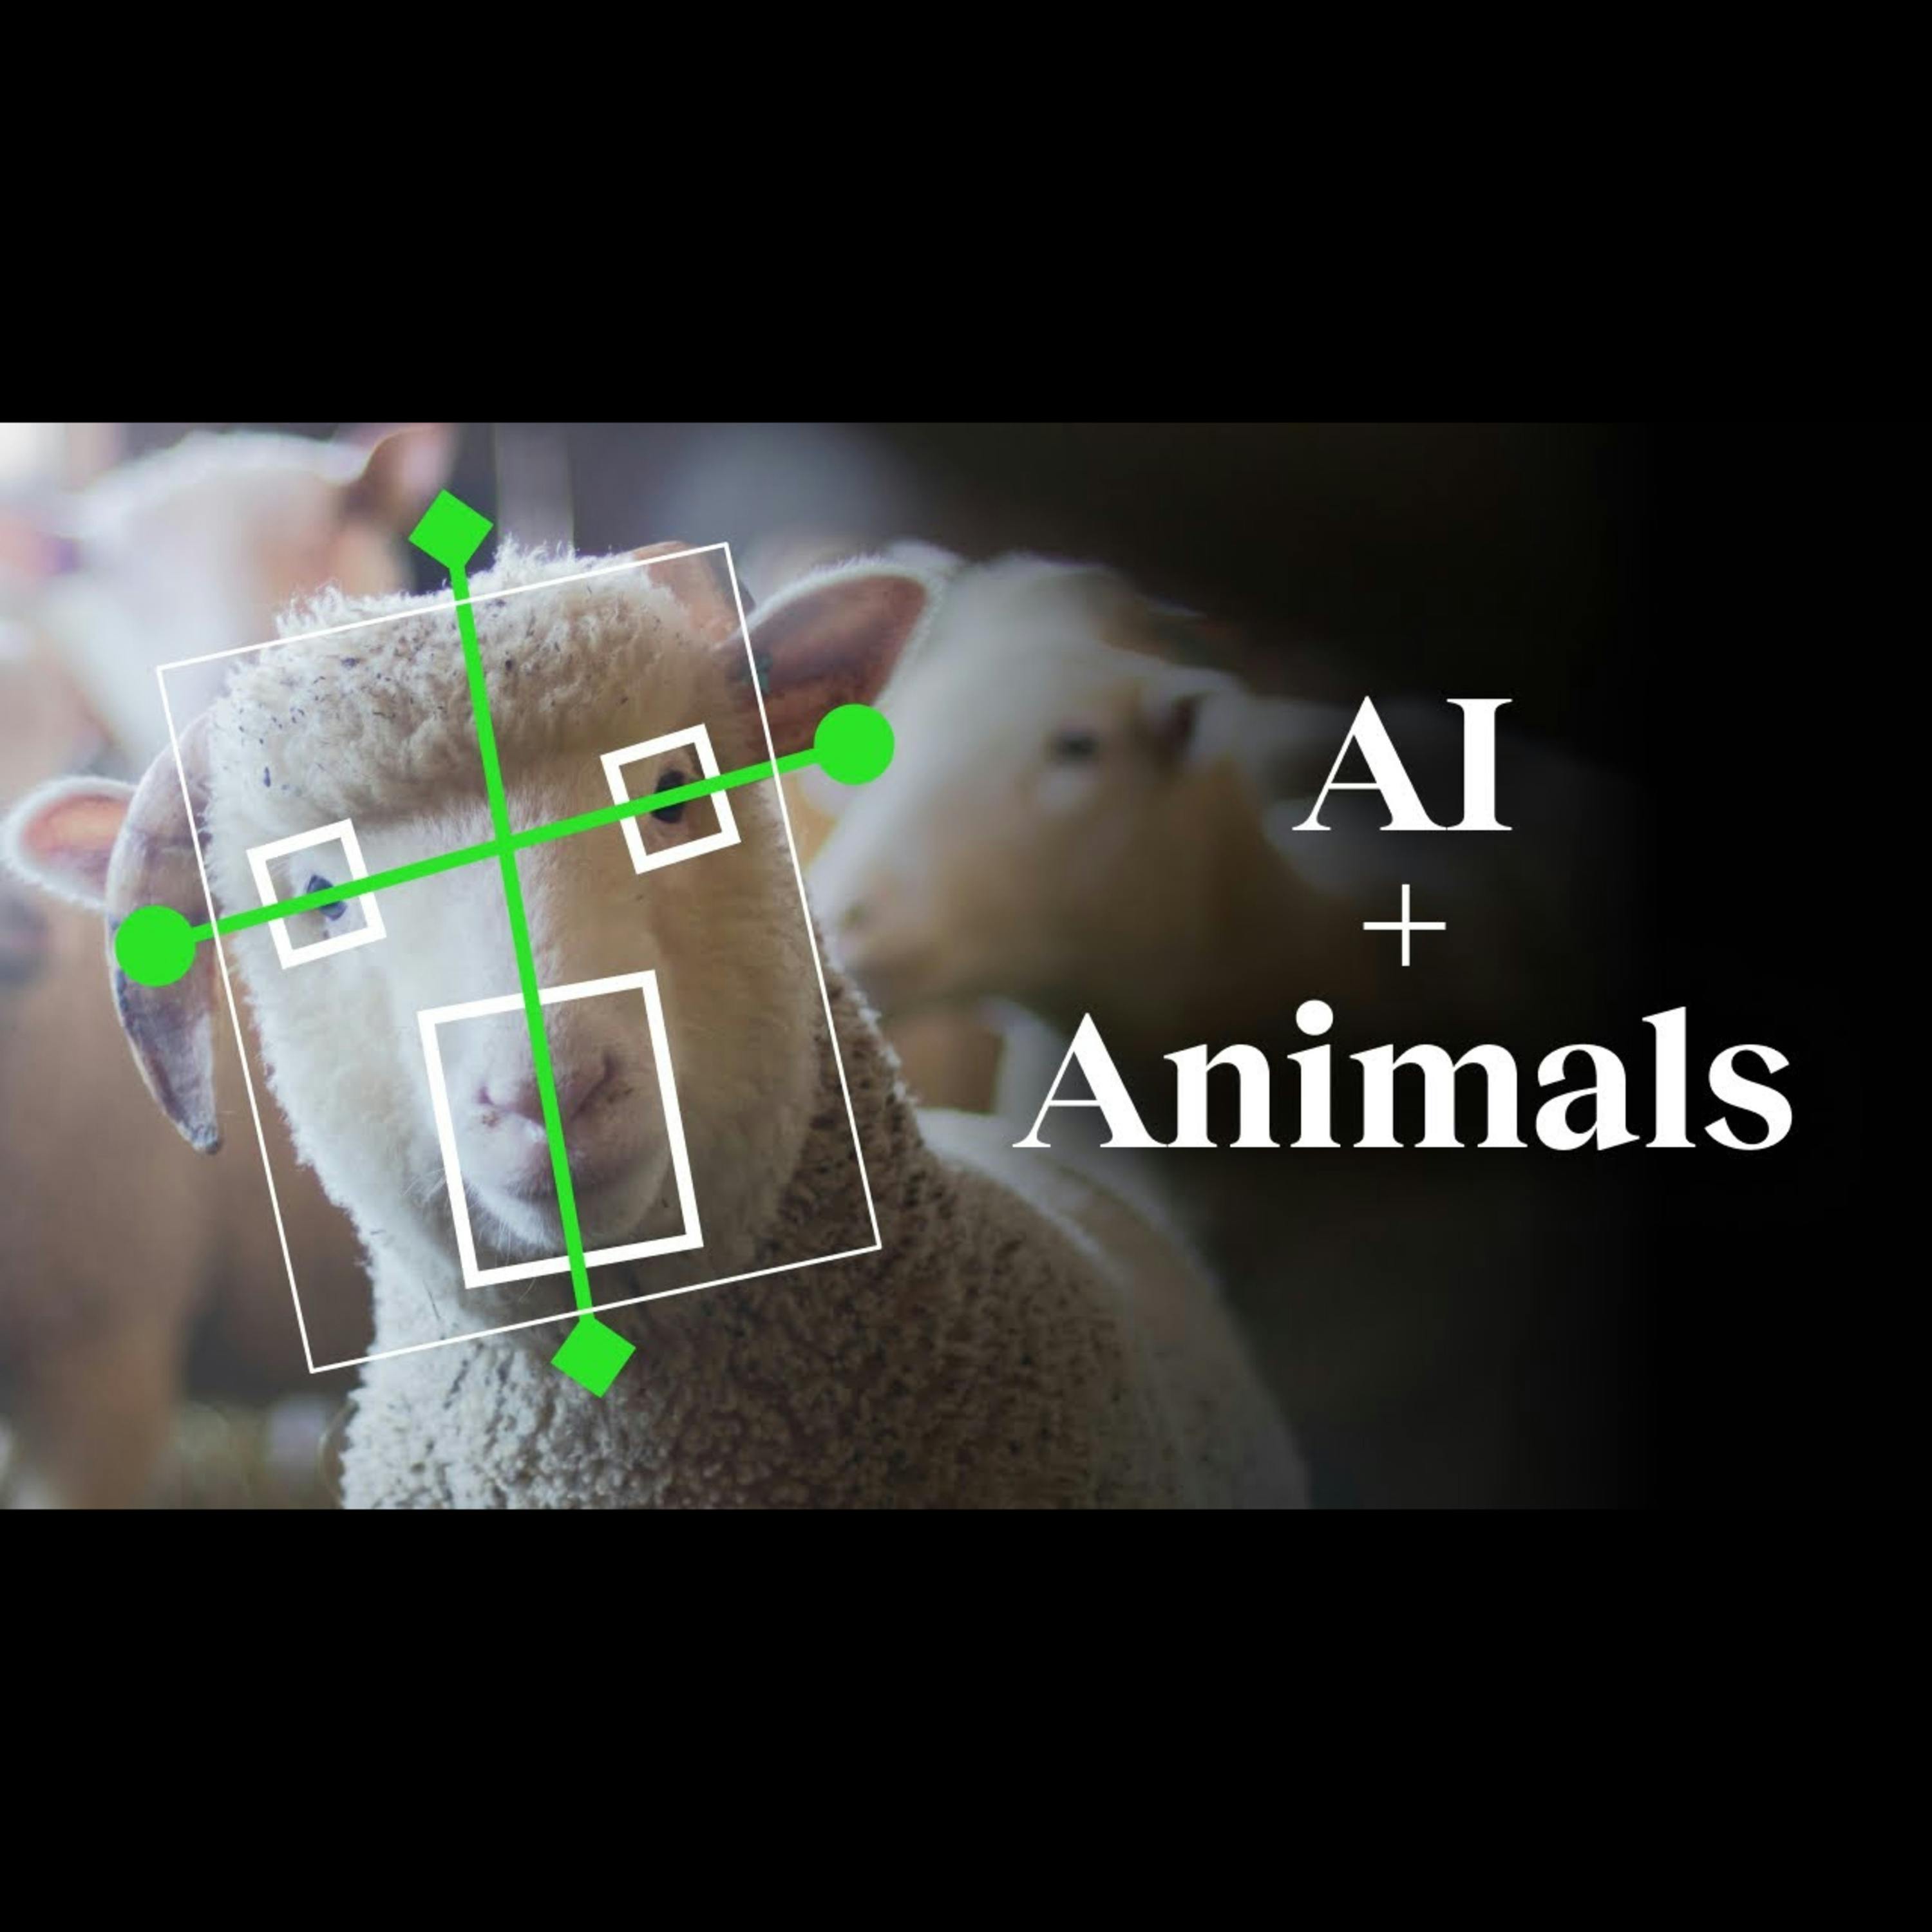 The unexpected impact of AI on animals | Peter Singer - BIGTHINK